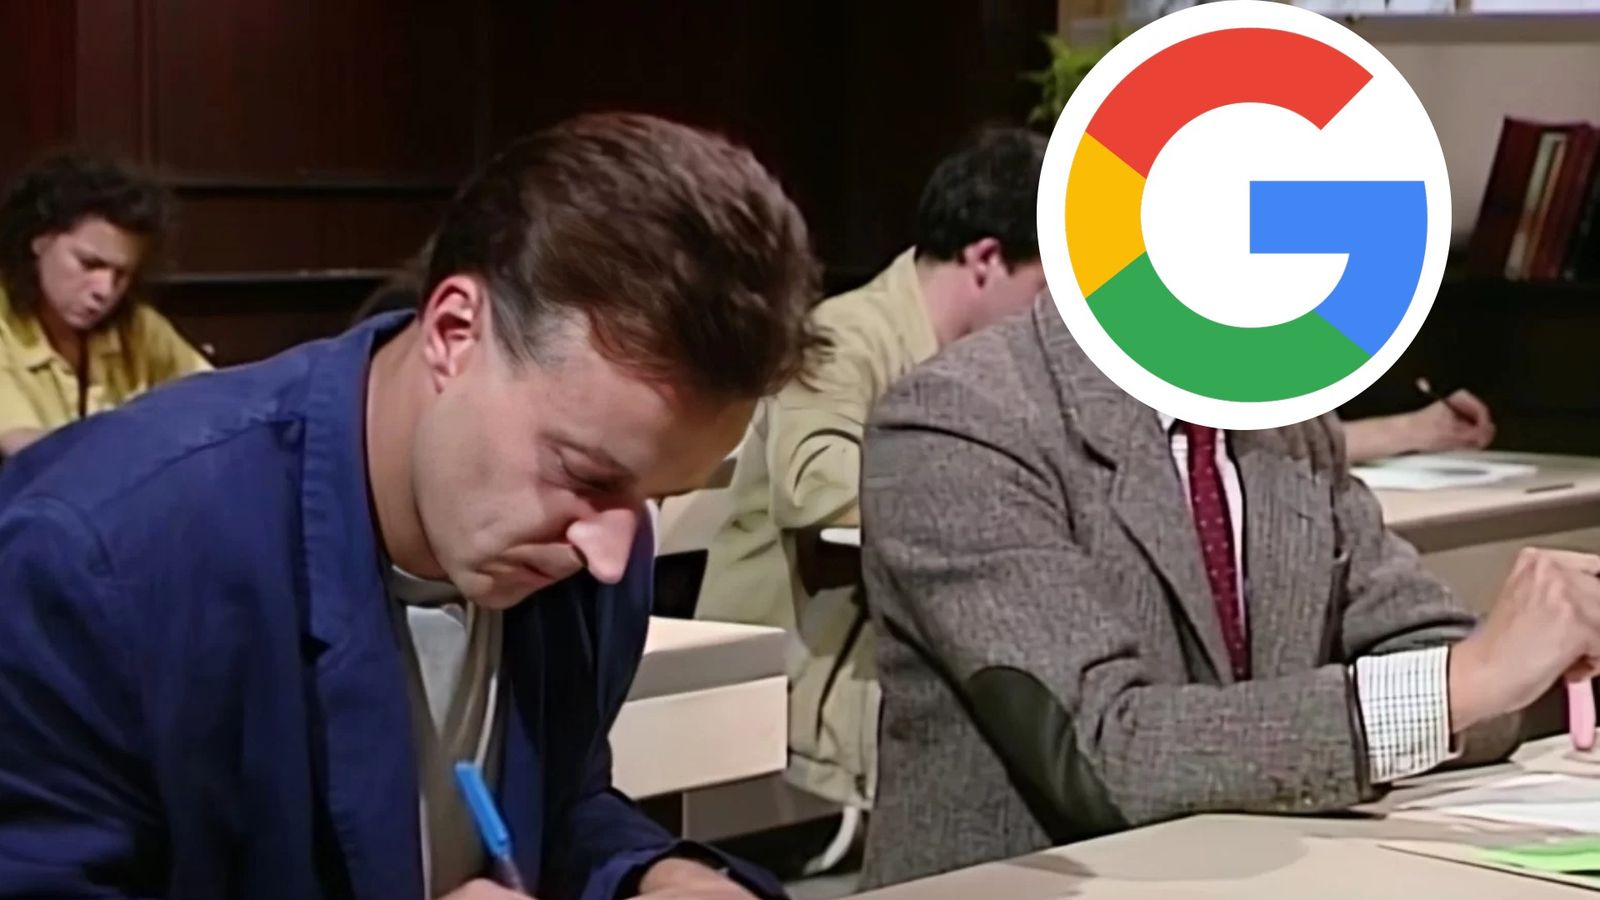 Mr Bean's head replaced with the Google logo looking over at someone else's work